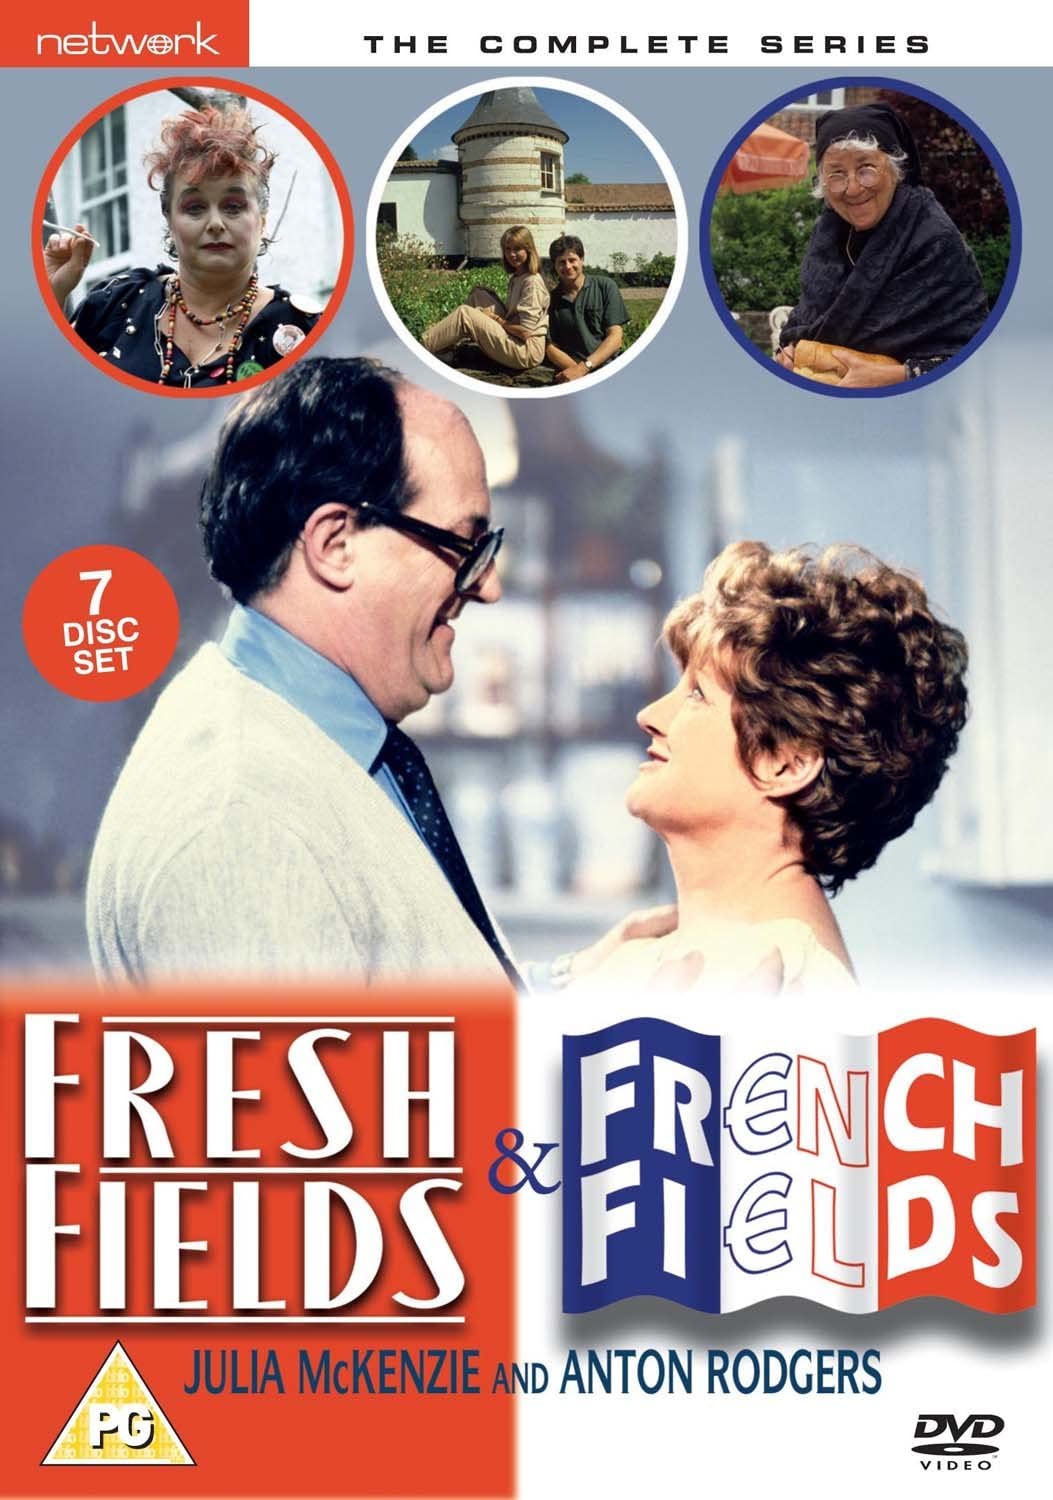 Fresh Fields/French Fields - The Complete Series [DVD]